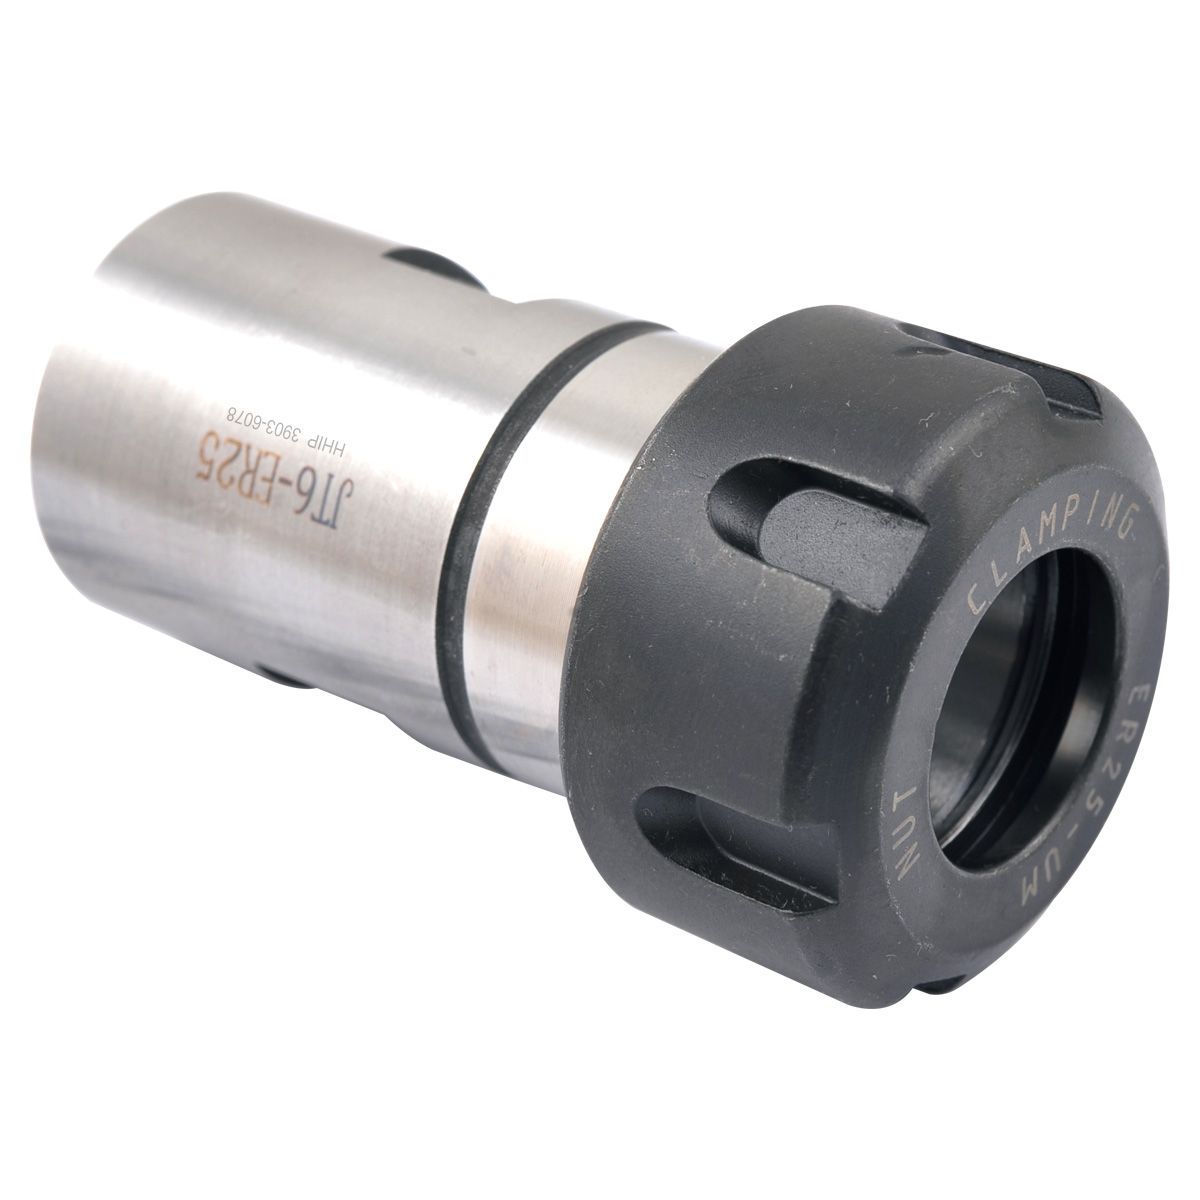 ER25 COLLET & DRILL CHUCK WITH JT6 SLEEVE (3903-6078)